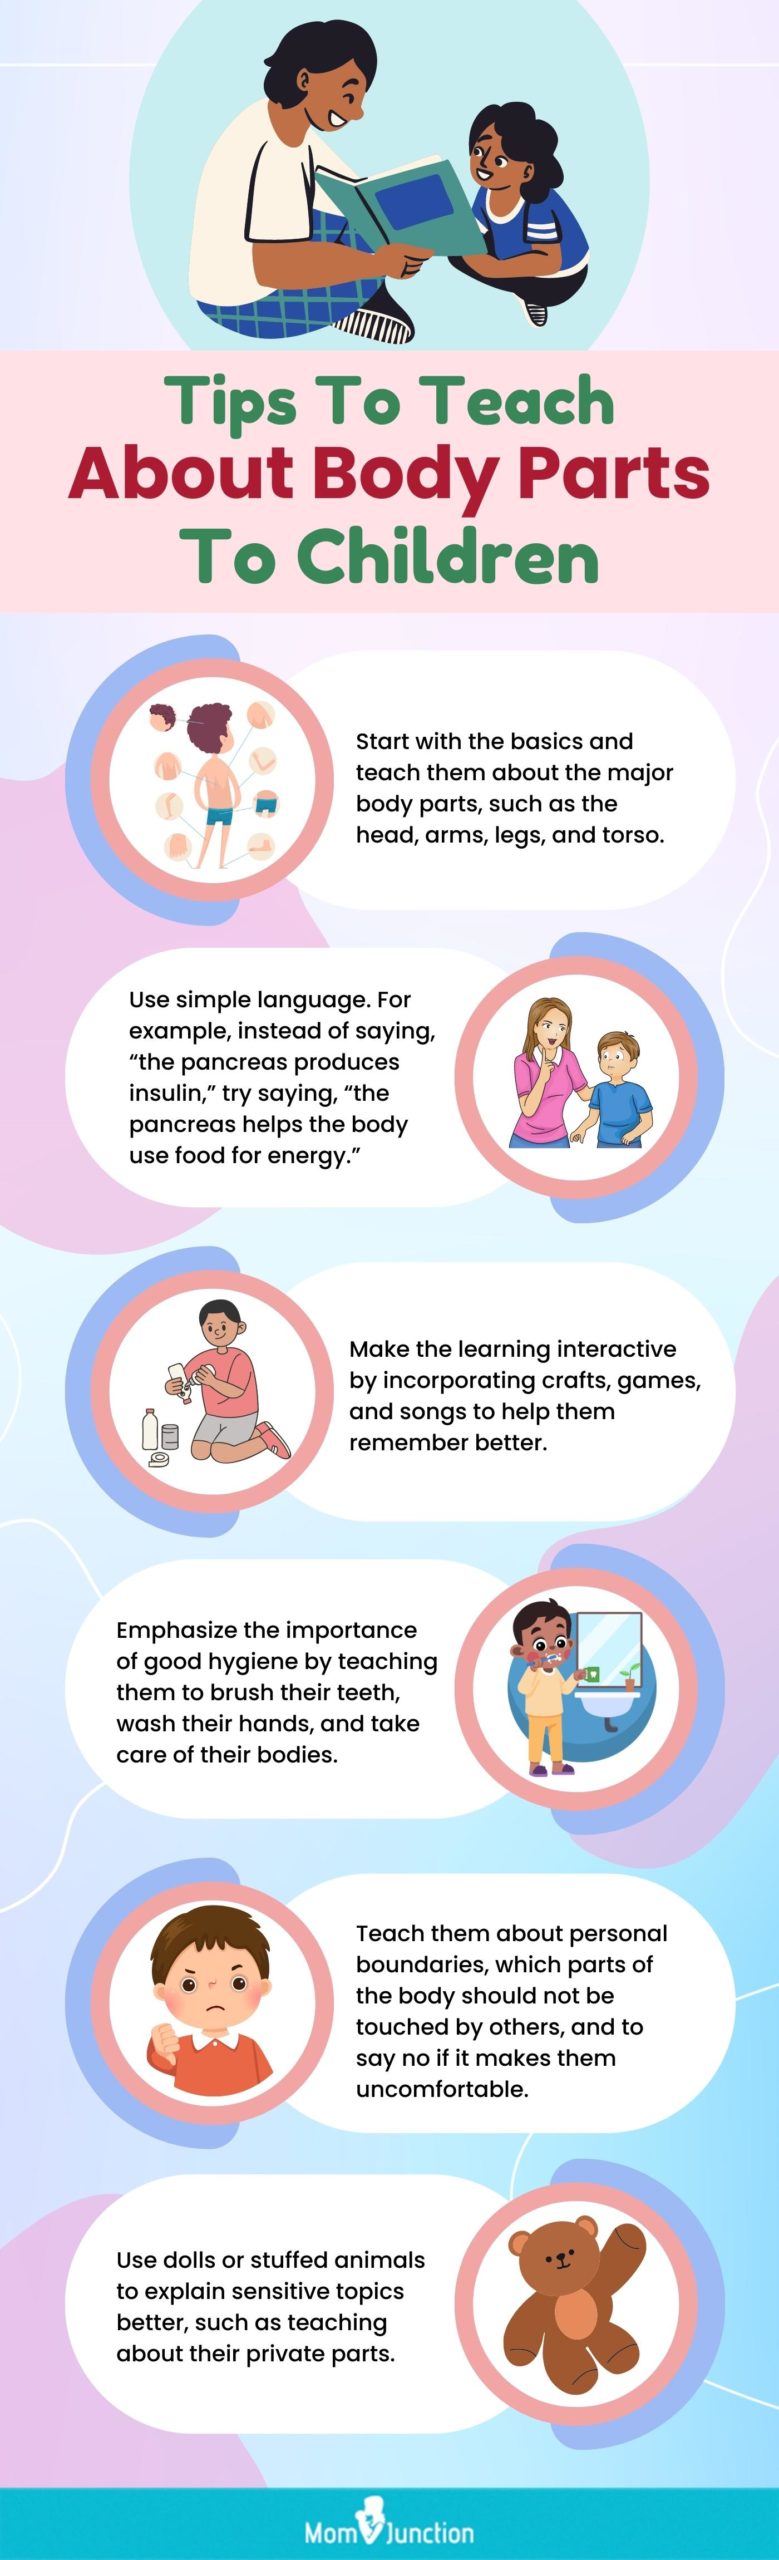 tips to teach about body parts to children (infographic)